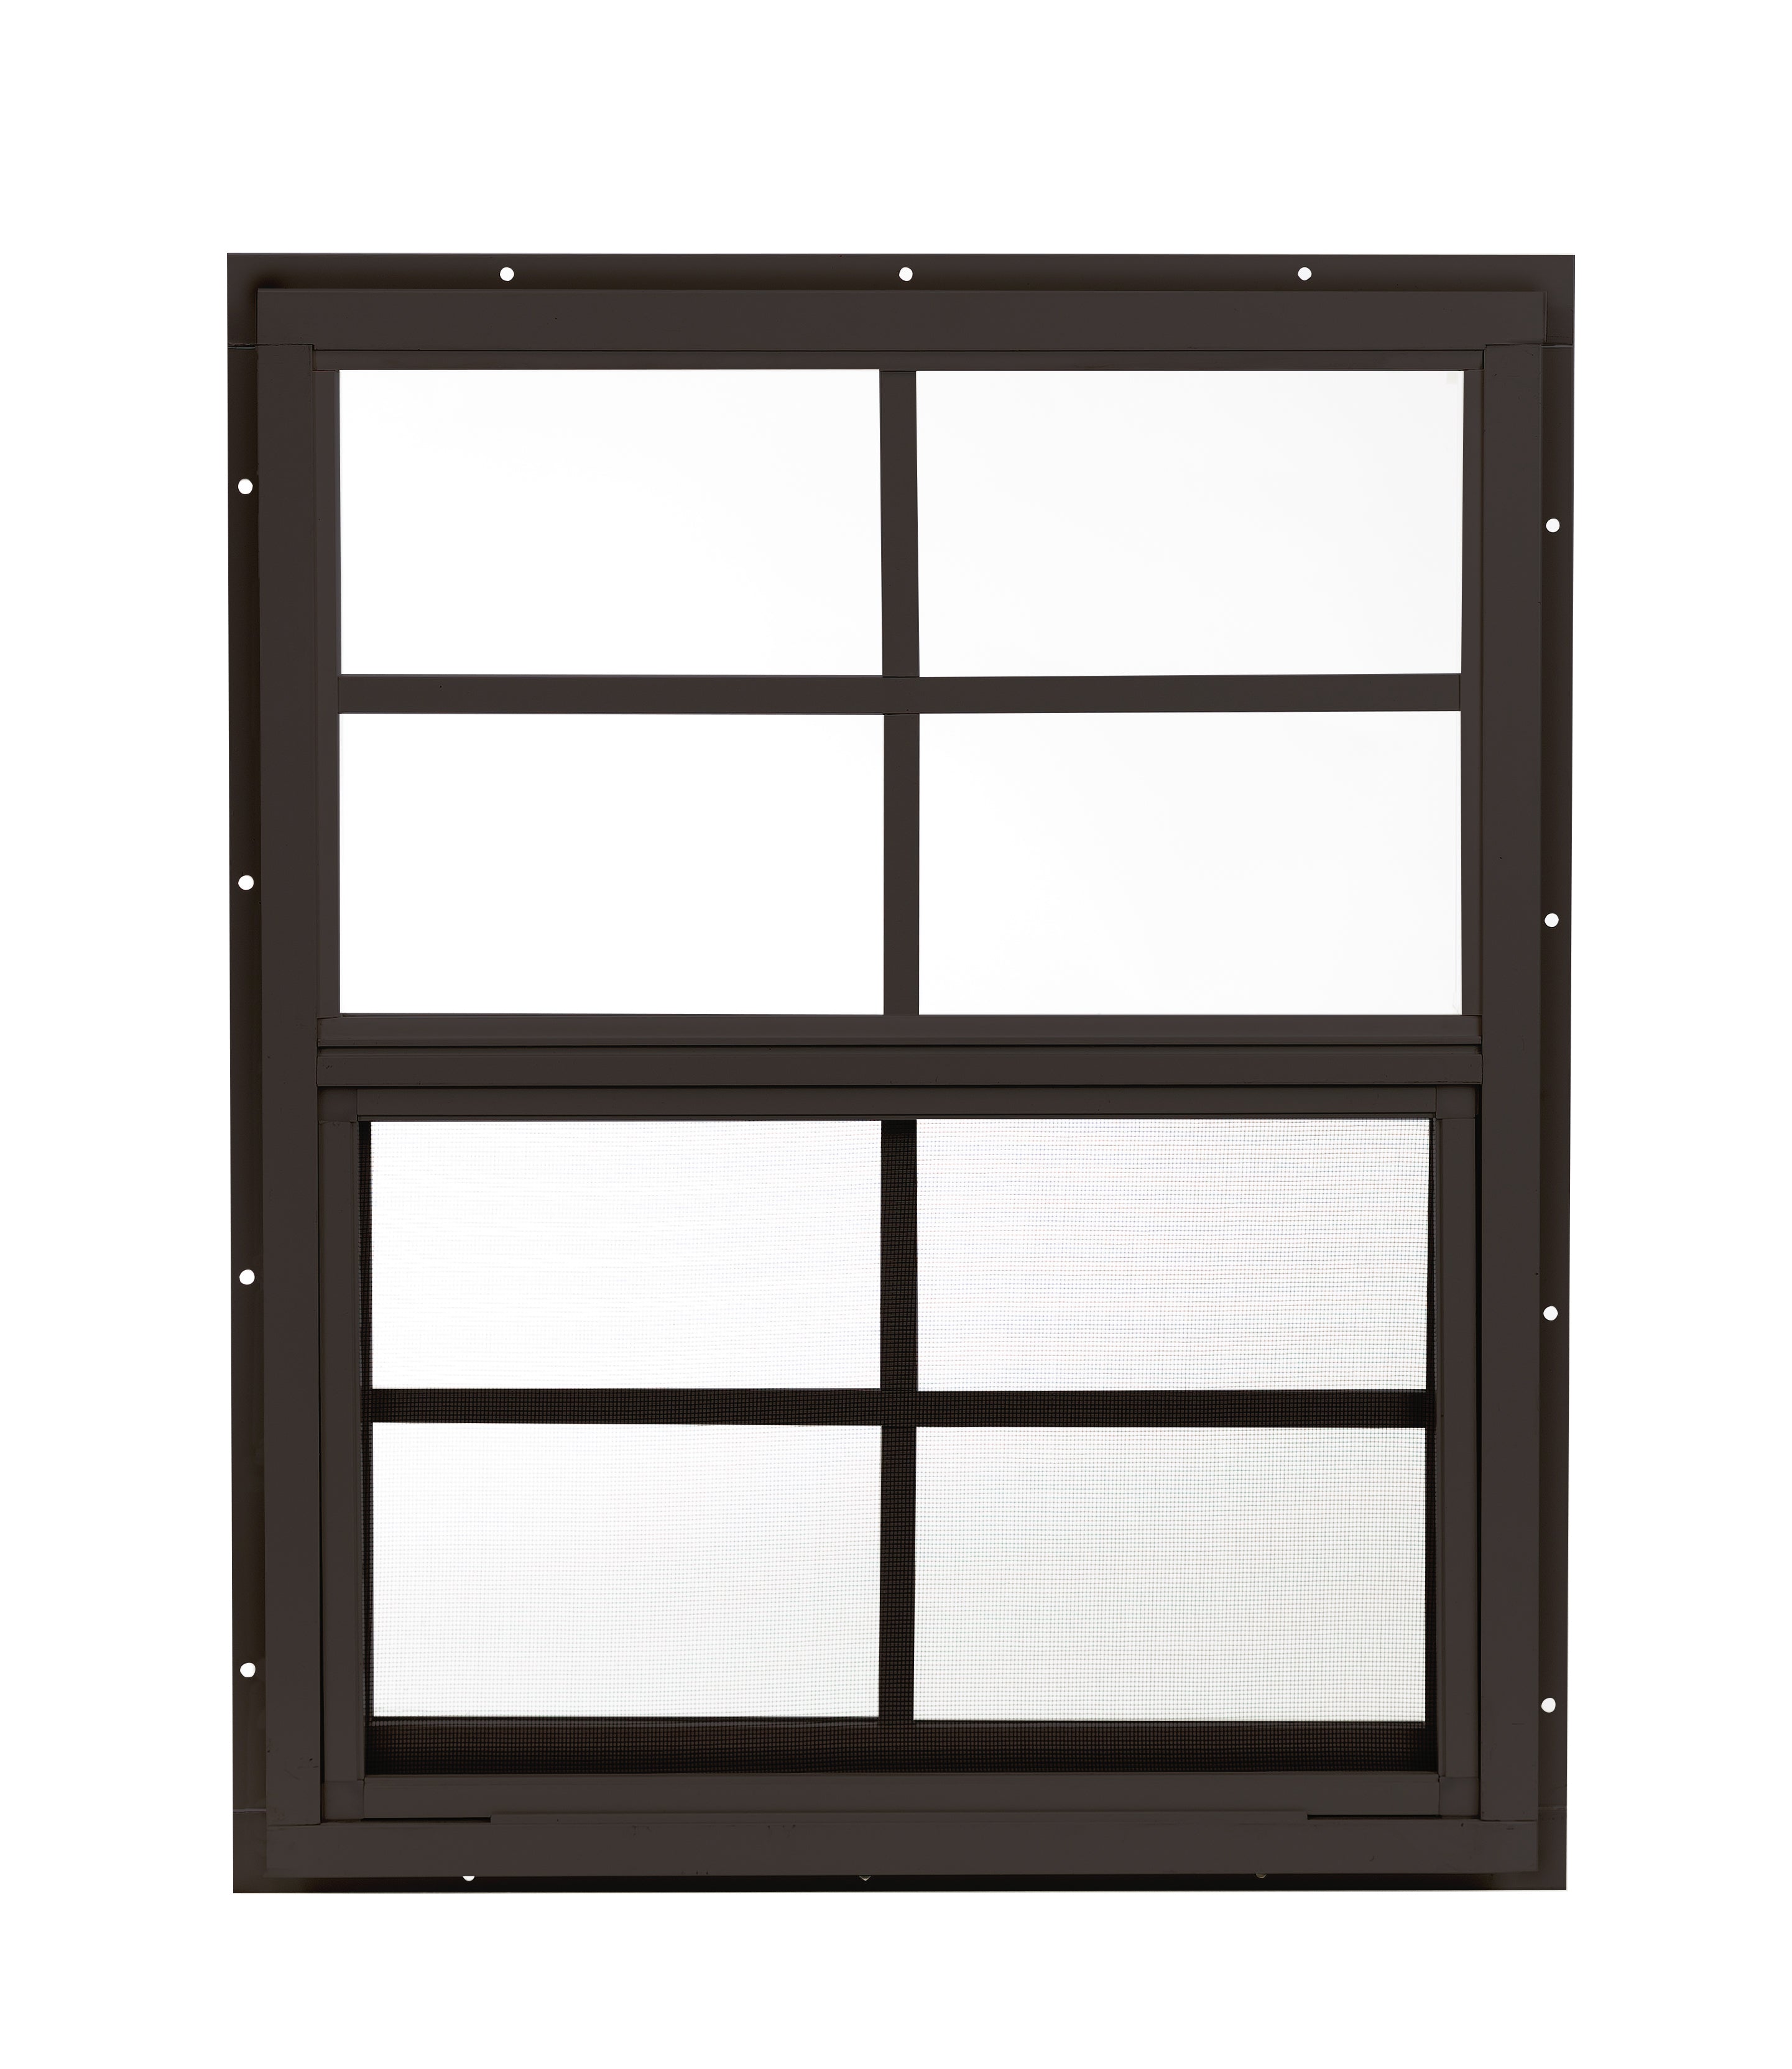 18" W x 23" H Single Hung J-Lap Mount Brown Window for Sheds, Playhouses, and MORE